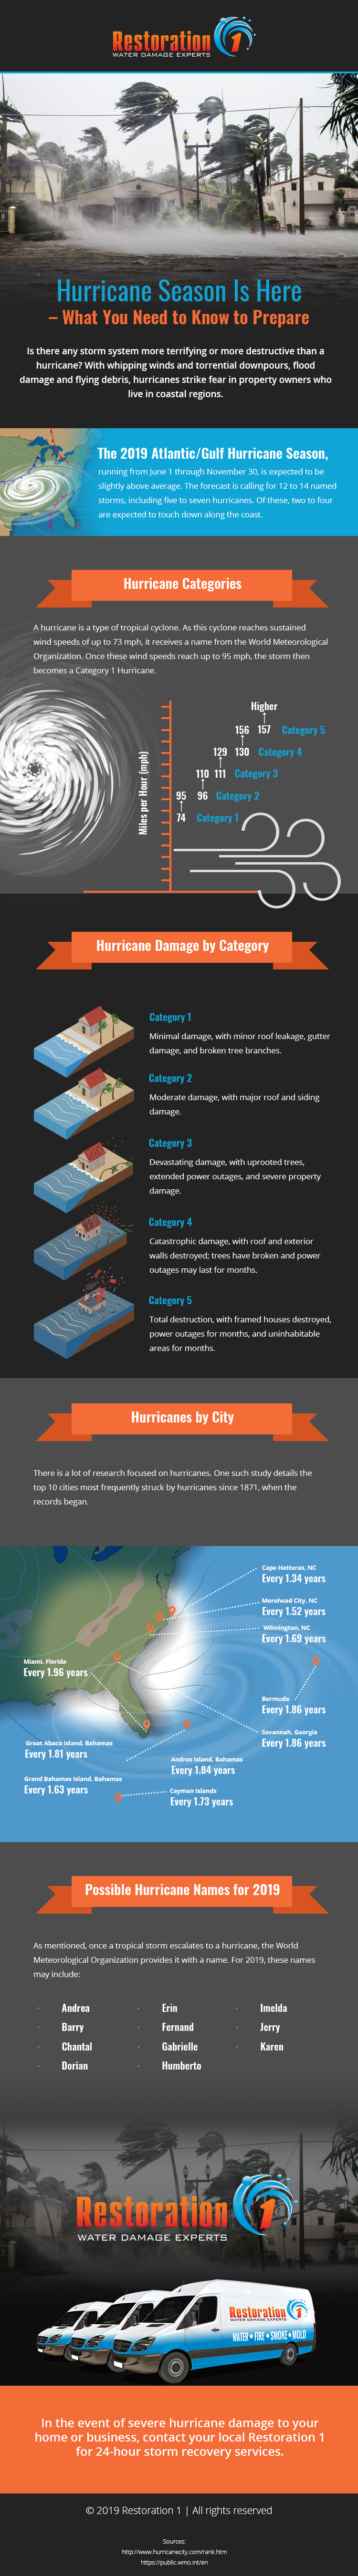 Review And Share Information About The 2019 Hurricane Season Today With This Informative And Educational Infographic.